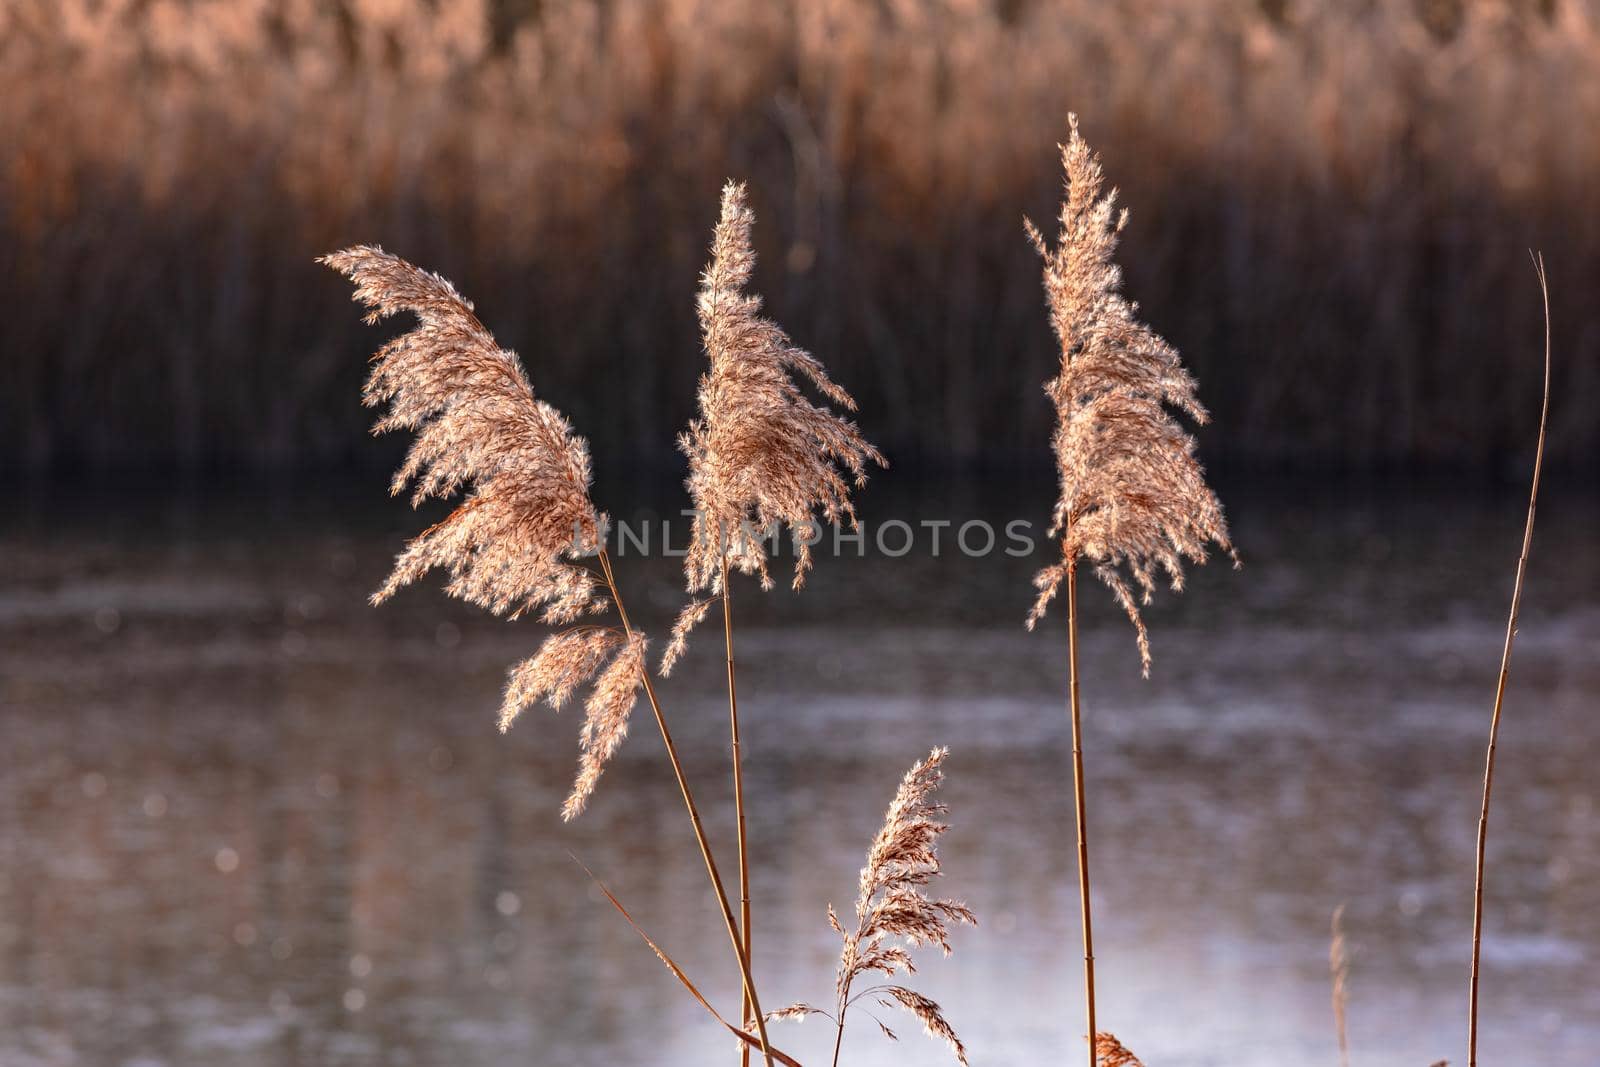 Reeds on a lake in the sun and freezing temperatures in the backlight